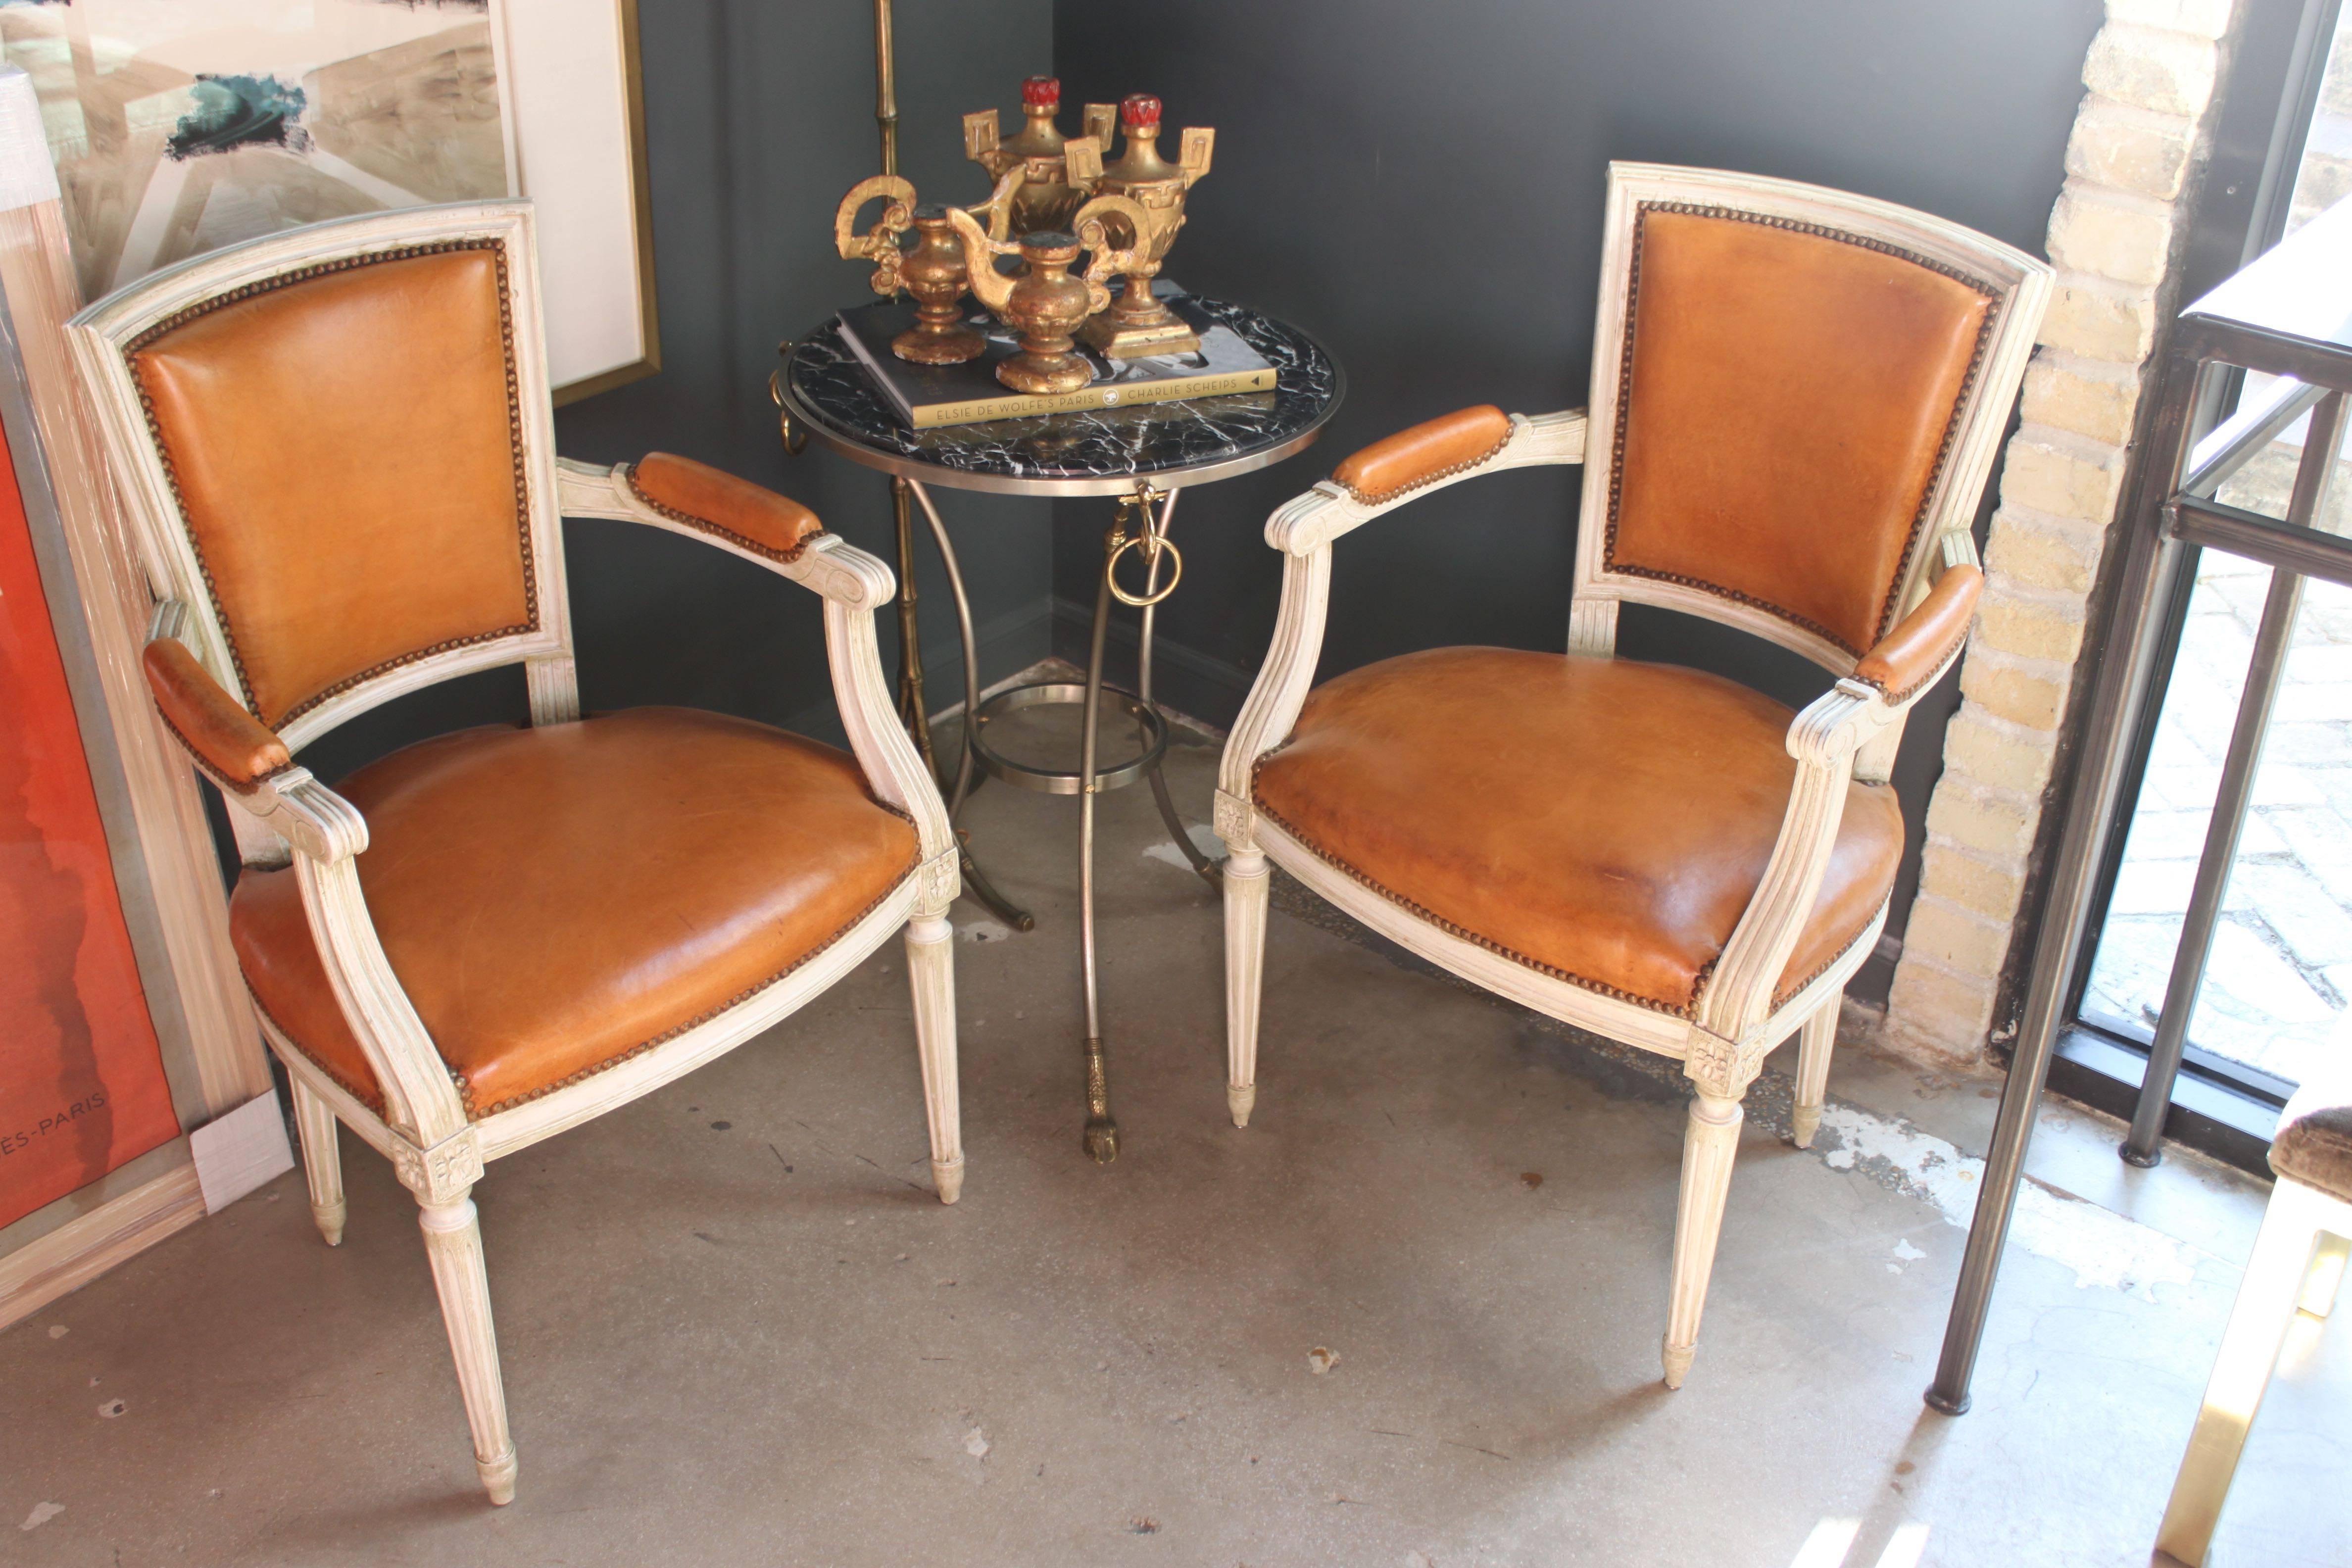 Pair of Armchairs or Fauteuils with Leather Upholstery in Louis XVI Style For Sale 2